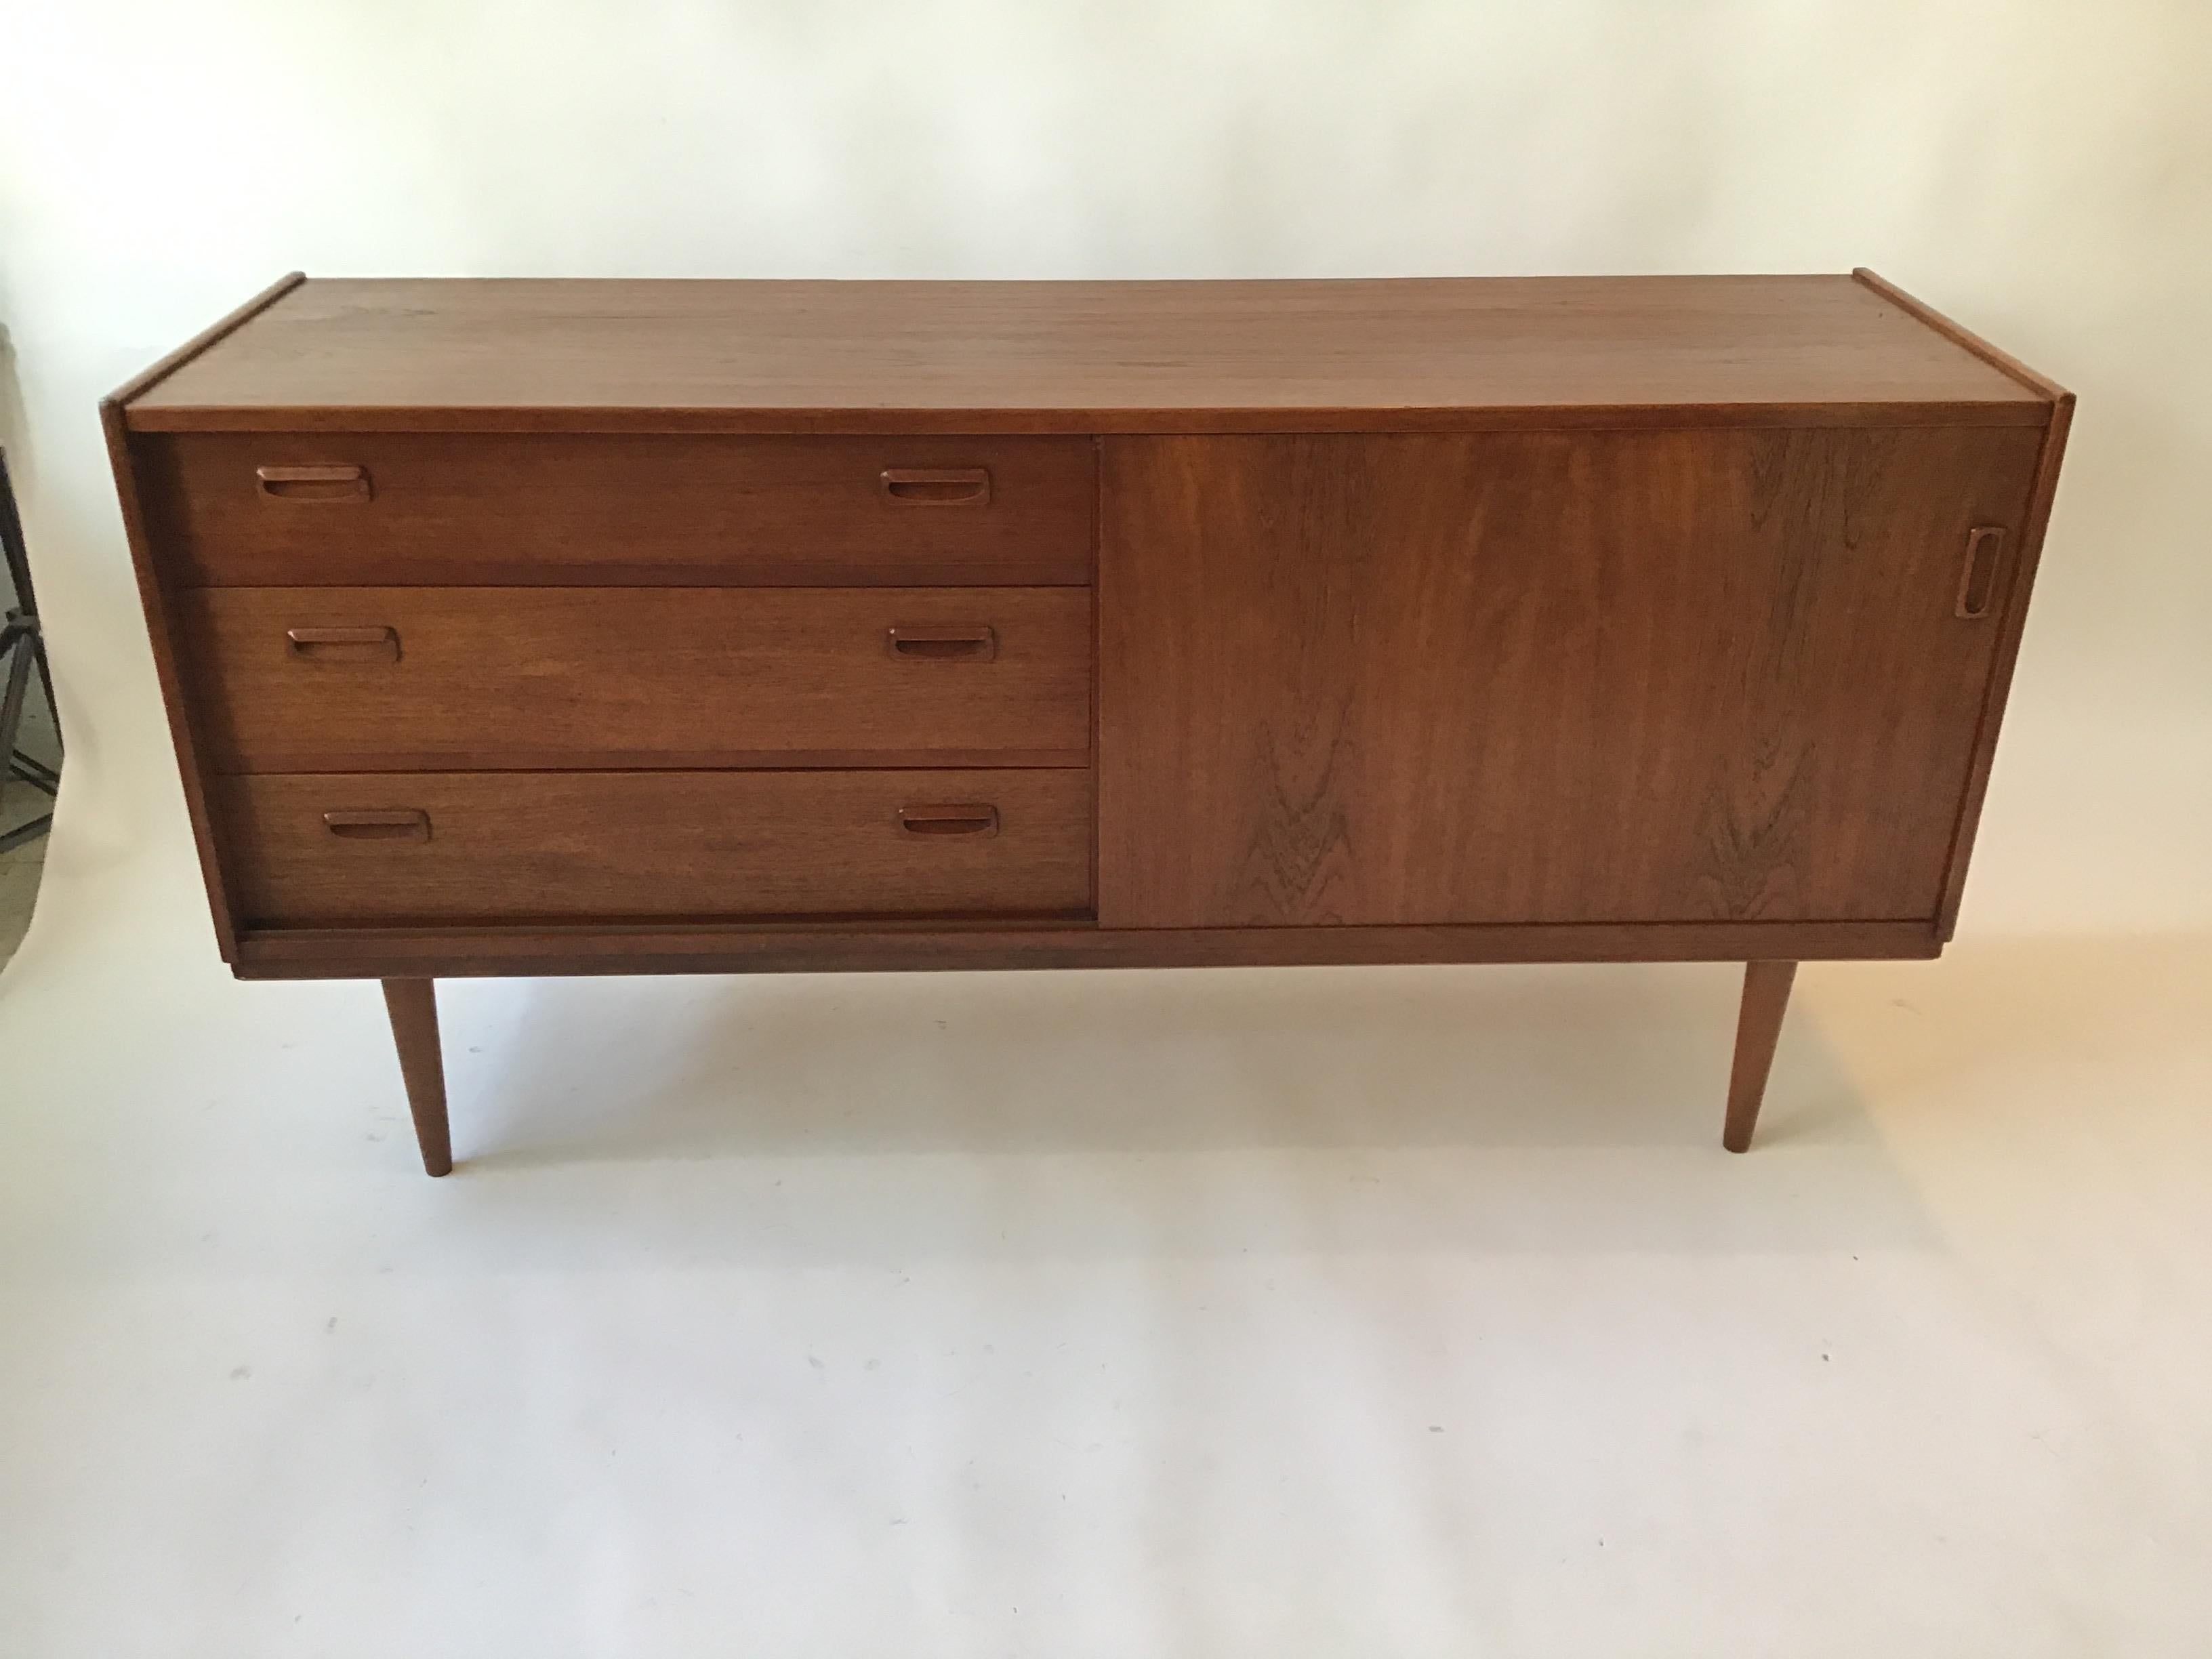 1960s Scandinavian teak sideboard. Refinished. From a Southampton, NY estate.